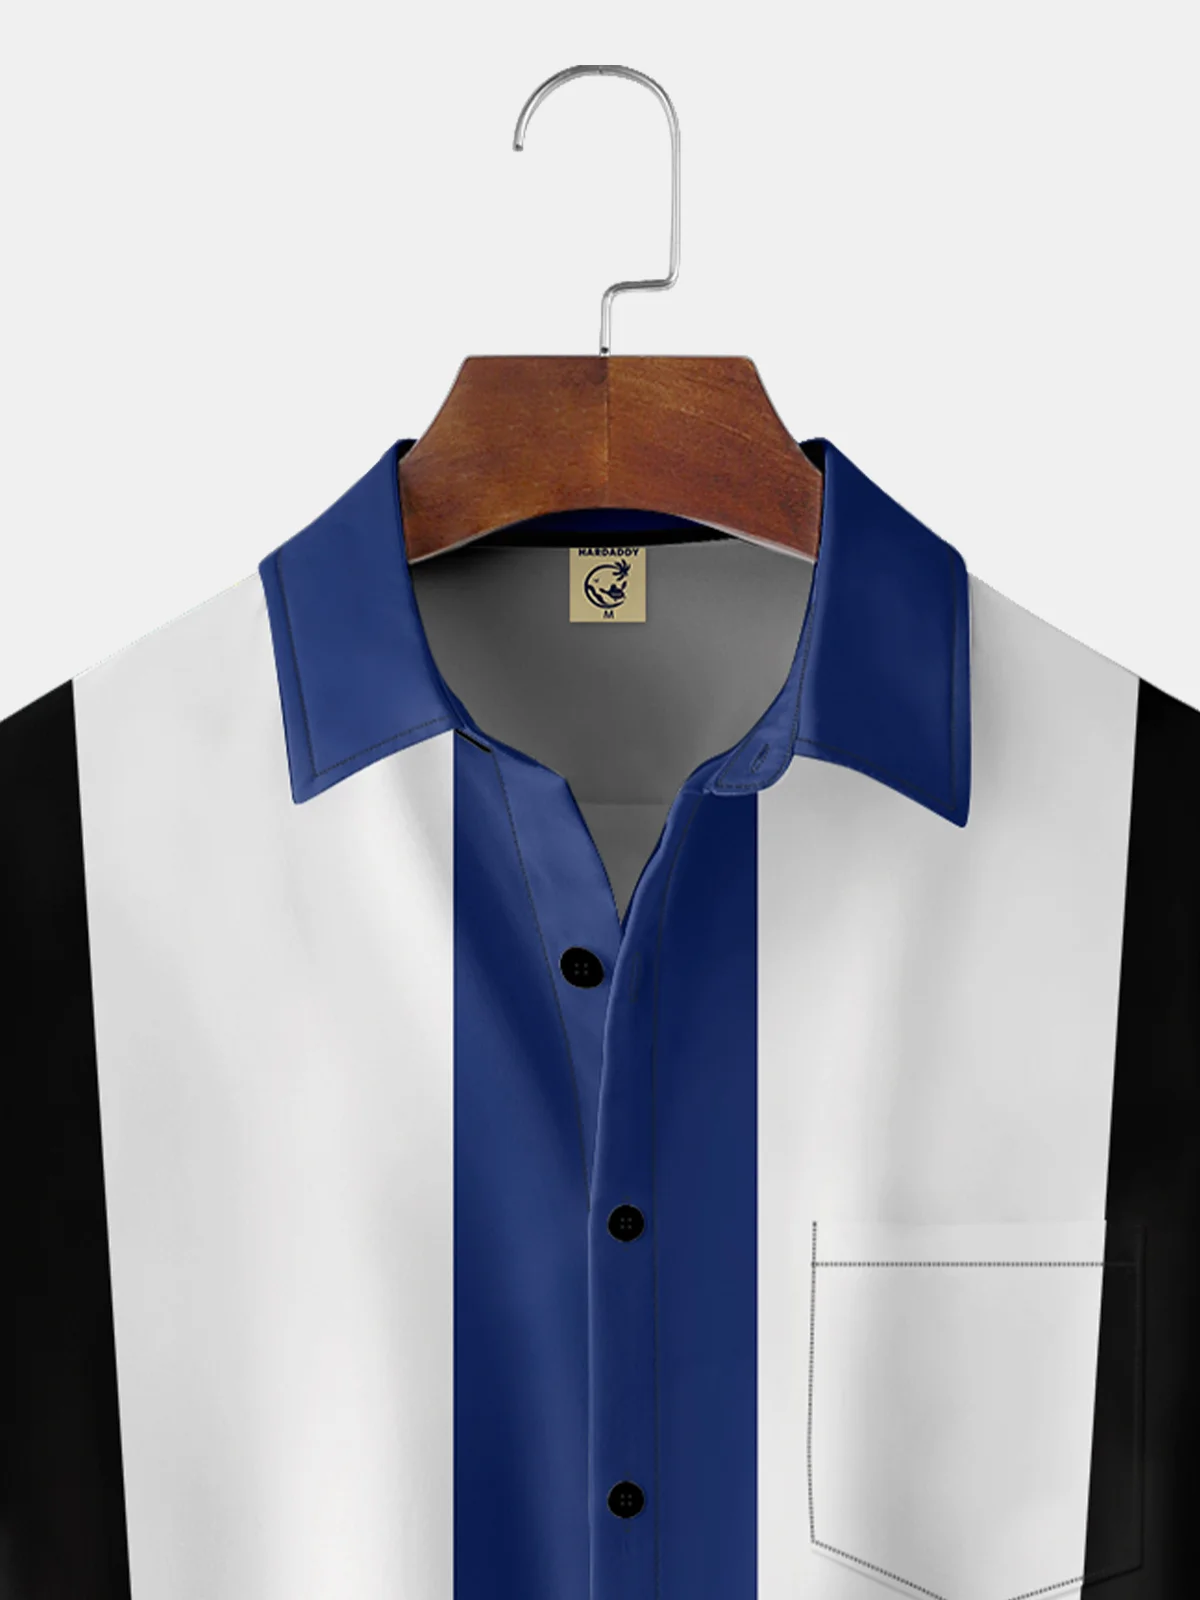 Moisture-wicking Contrasting Chest Pocket Bowling Shirt